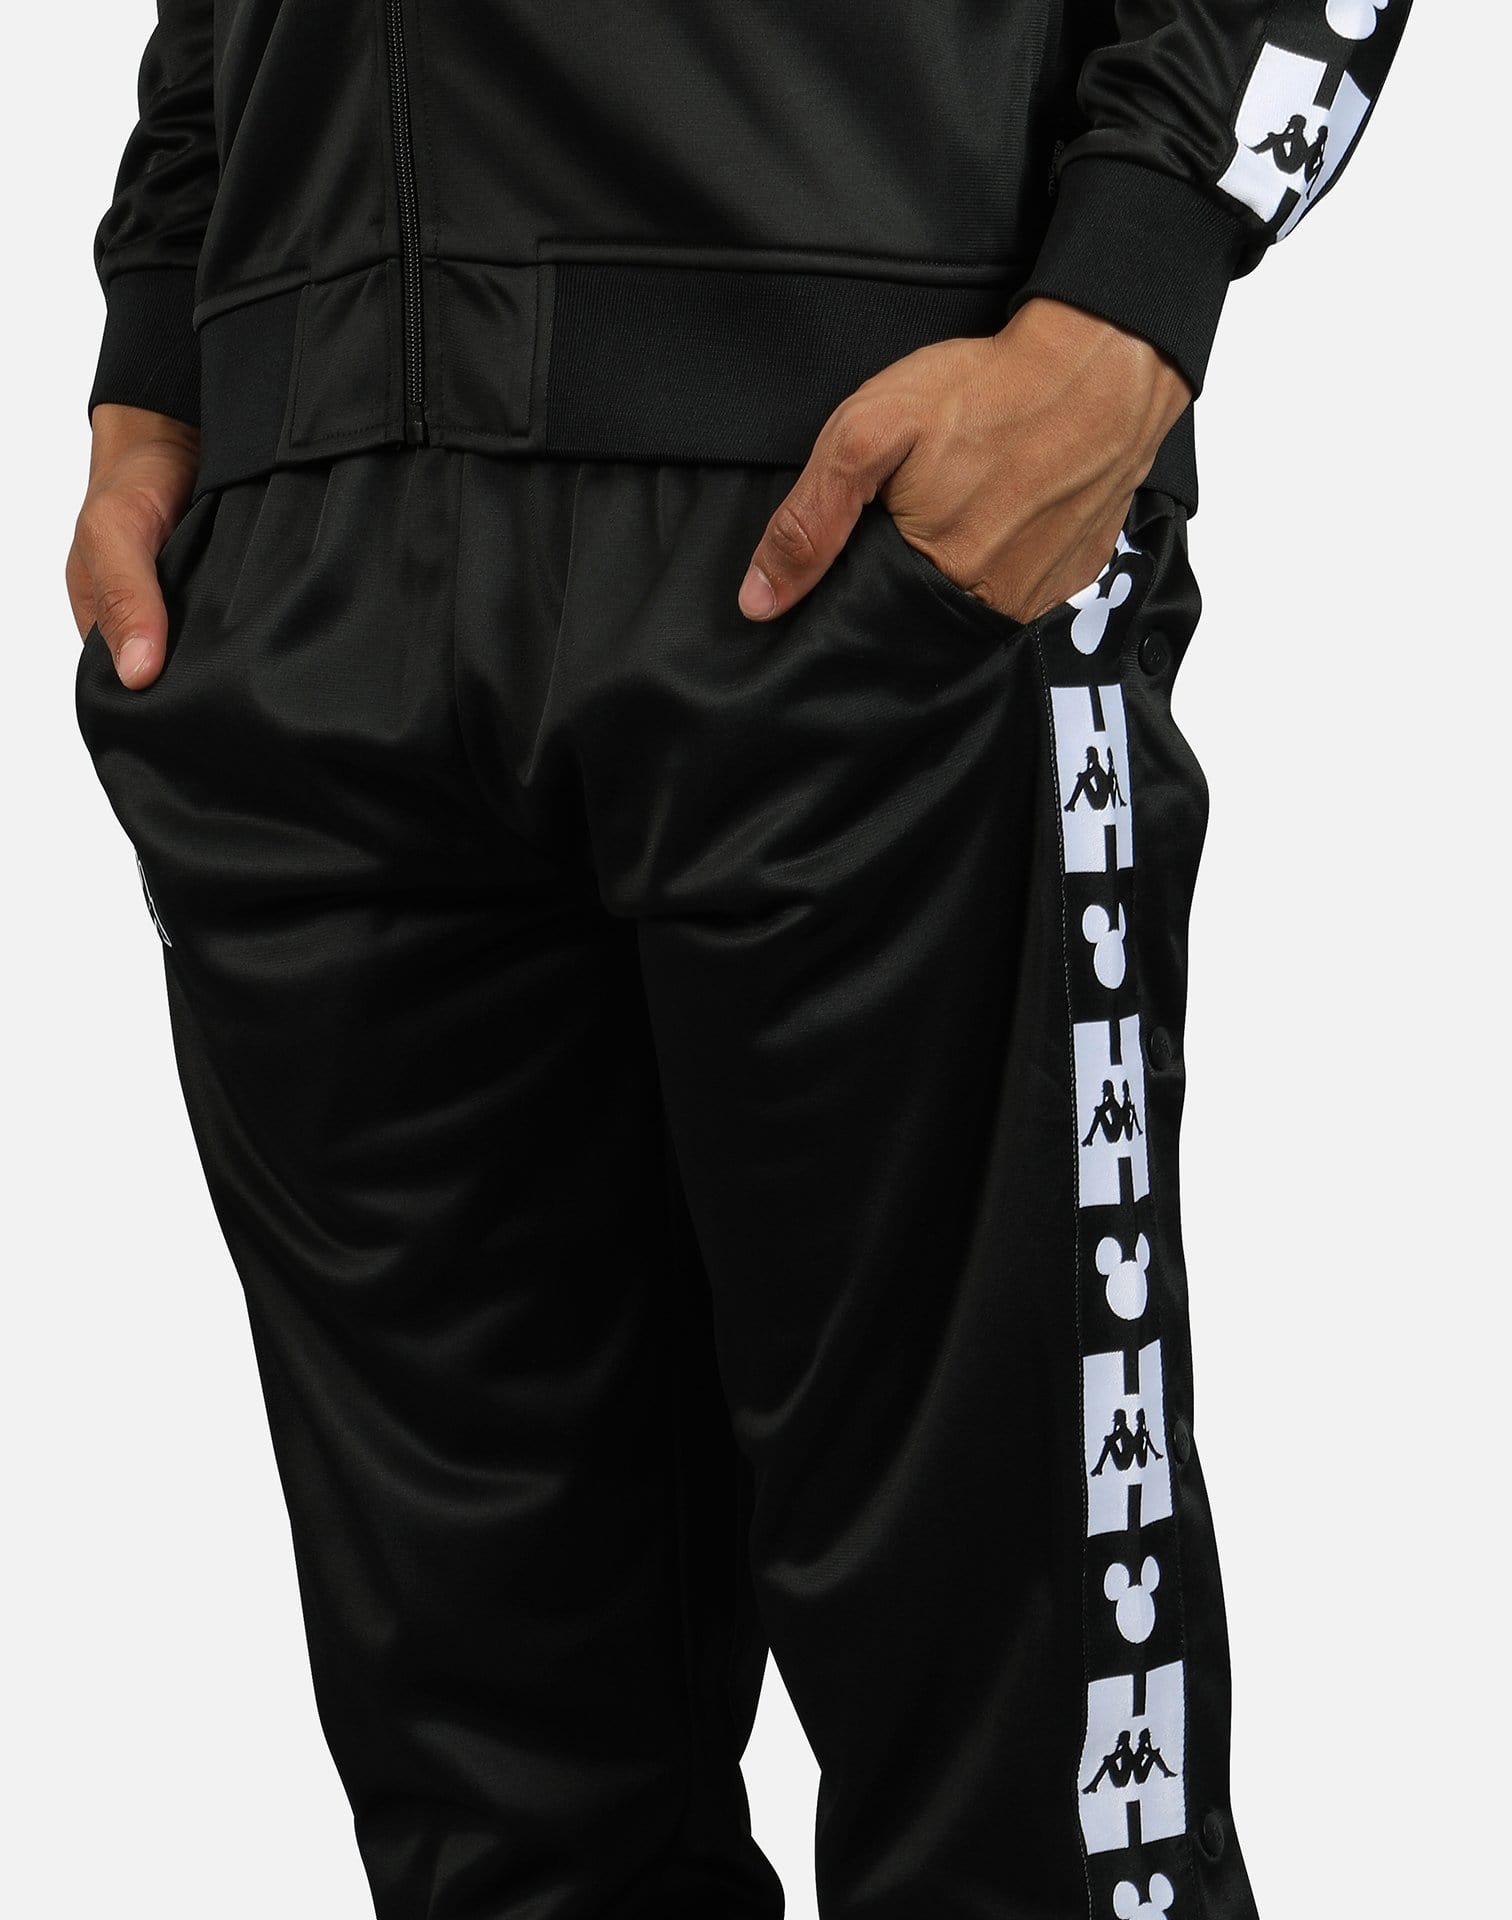 Kappa Men's Authentic Anthony x Disney Mickey Mouse Track Pants